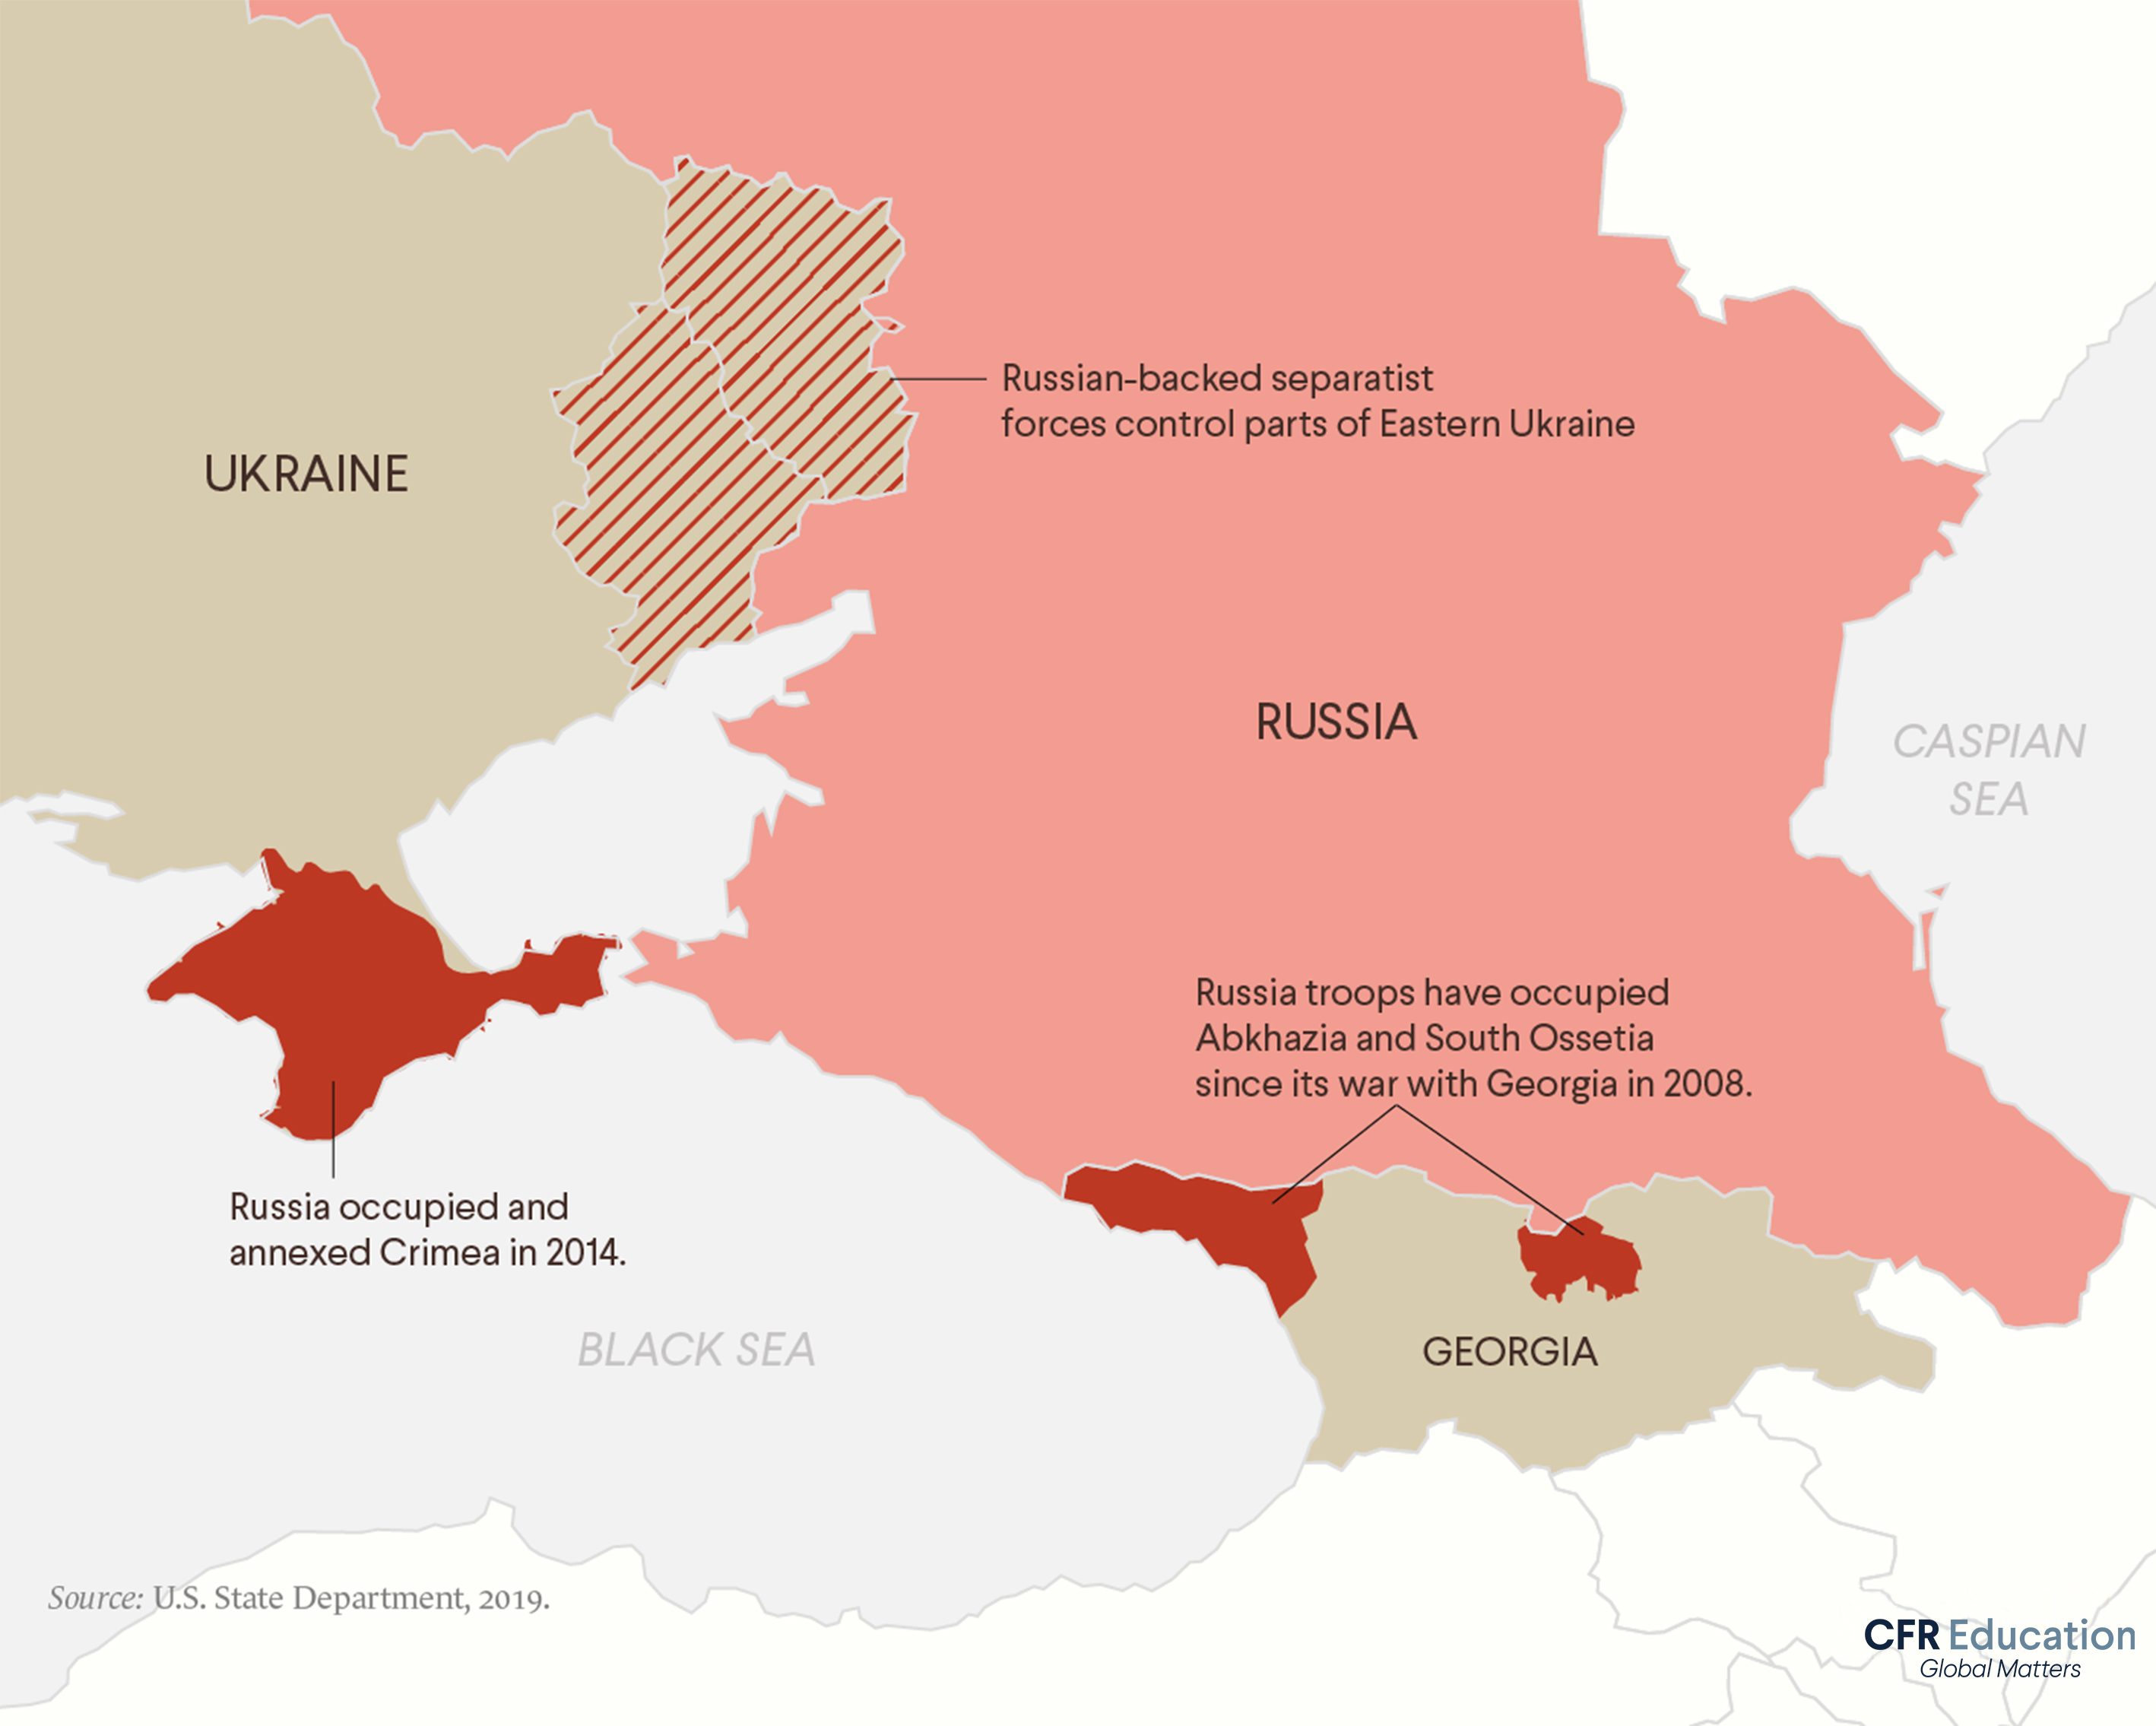 2019 map shows Russia occupied and annexed Crimea in 2014; parts of Georgia that Russian troops have occupied in 2008; and parts of Eastern Ukraine where Russia-backed separatist forces have control. For more info contact us at cfr_education@cfr.org.